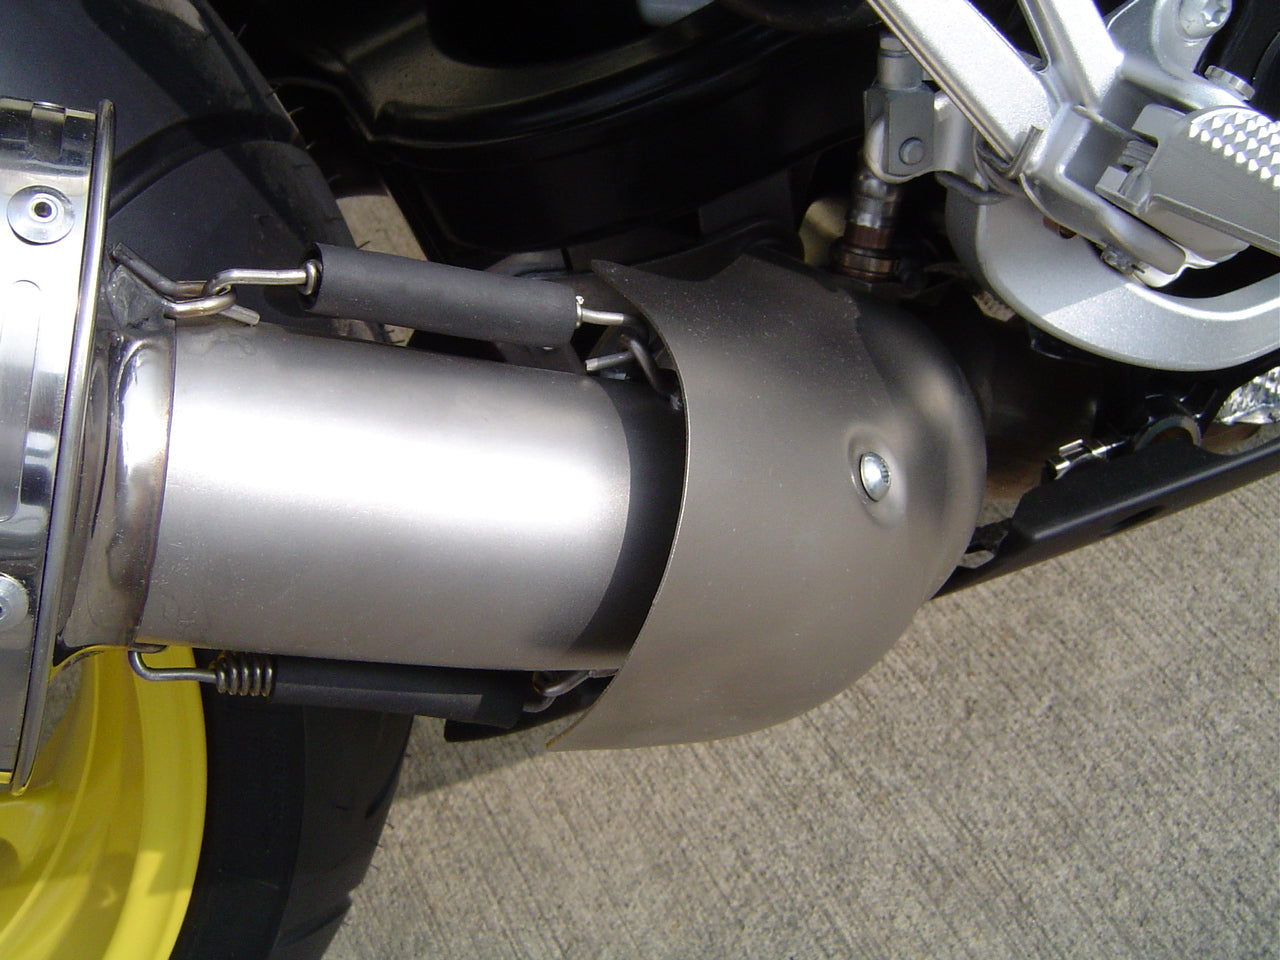 GPR Exhaust for Bmw K1300GT 2009-2011, M3 Inox , Slip-on Exhaust Including Removable DB Killer and Link Pipe